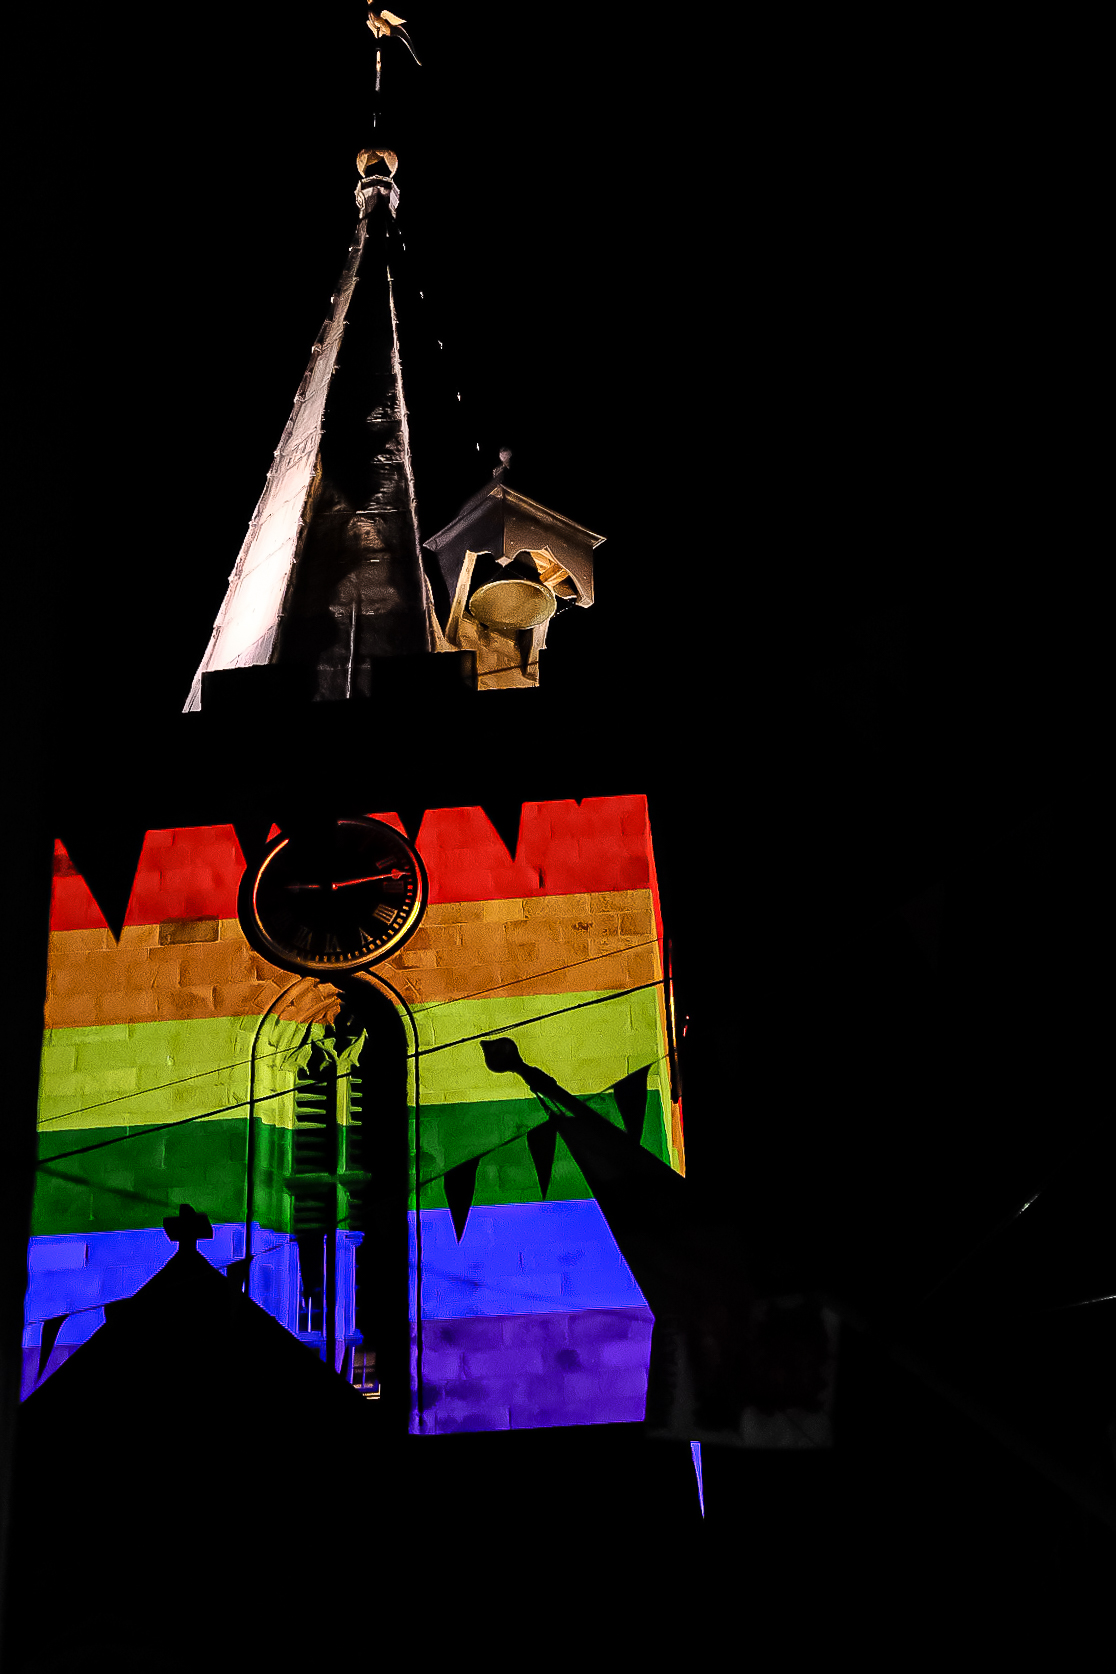 Pride colours were projected onto Town Church in Guernsey to show the community's support for the LGBTQ+ community